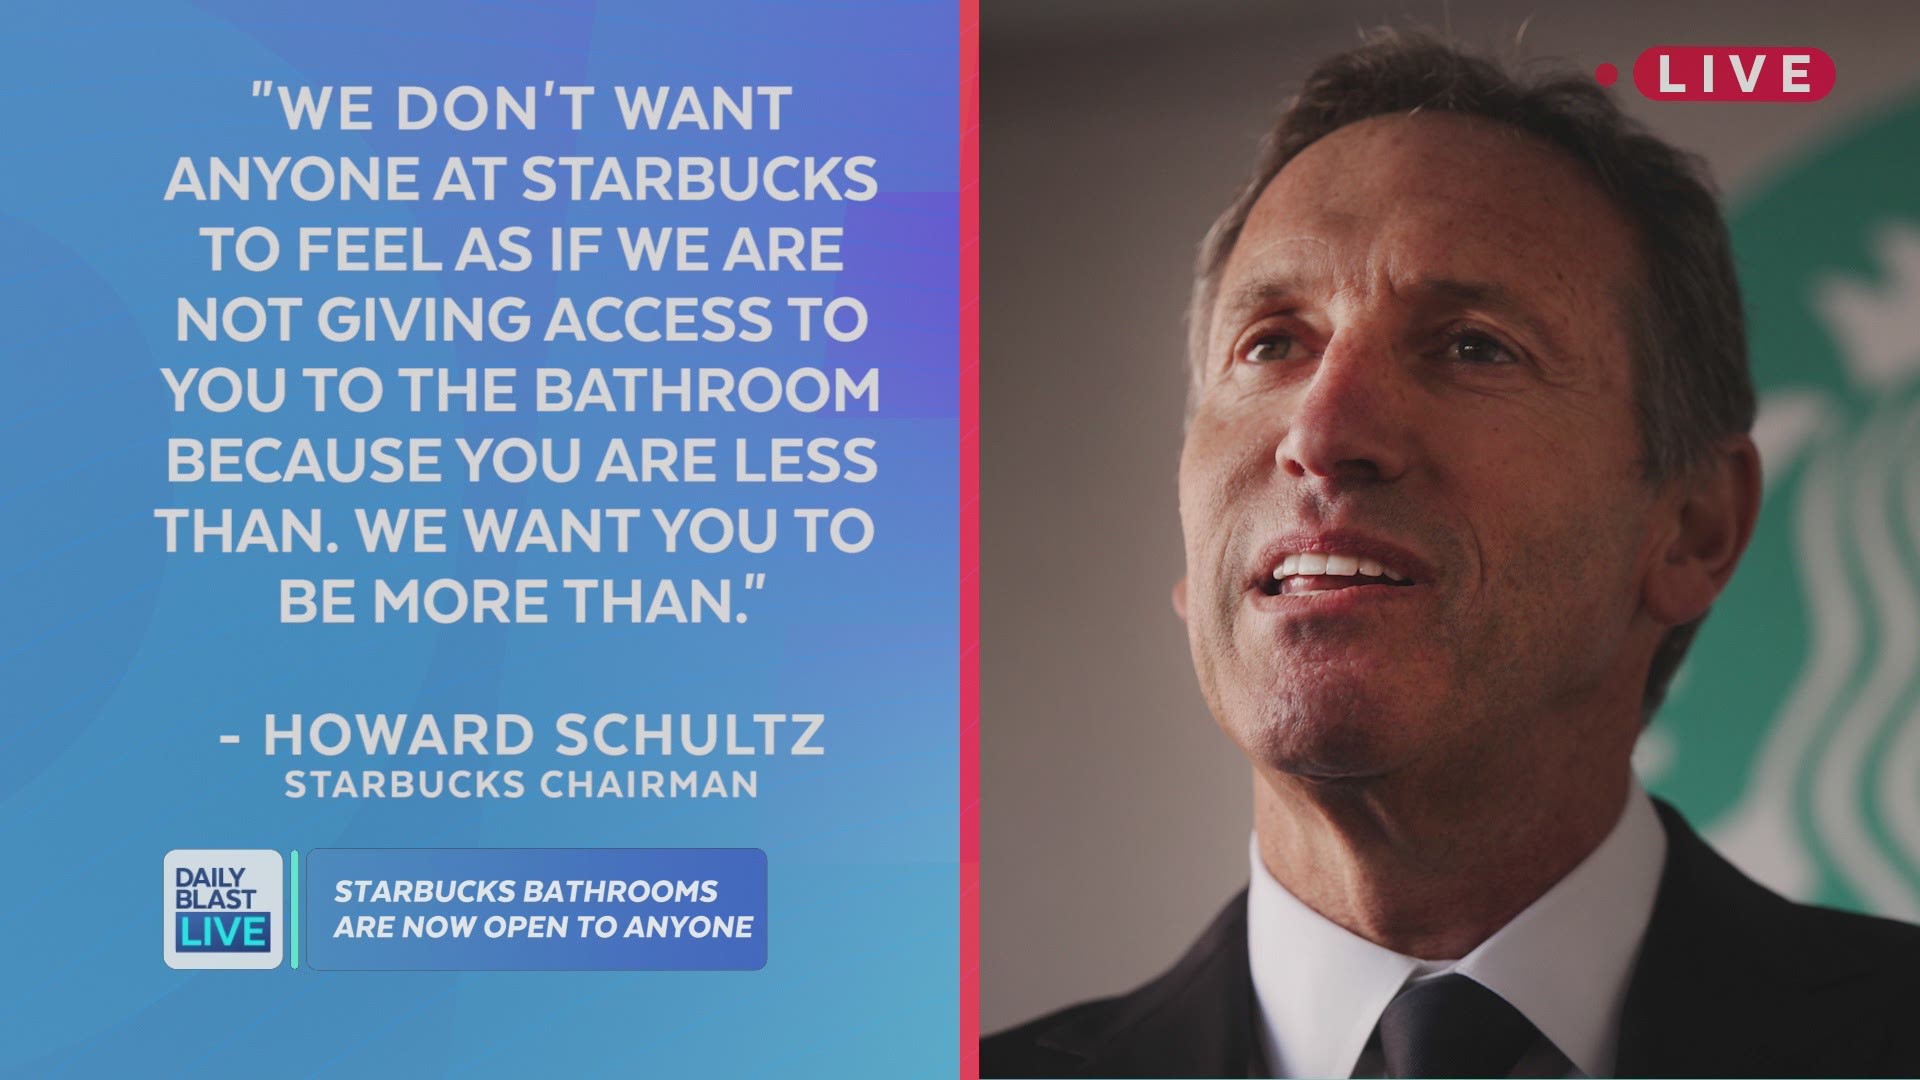 A major change is coming to your local coffee stop. In the wake of the controversy surrounding the two black men arrested in Philadelphia, Starbucks is opening up restrooms to everyone. Howard Schultz announced the new policy saying, "We don't want anyone